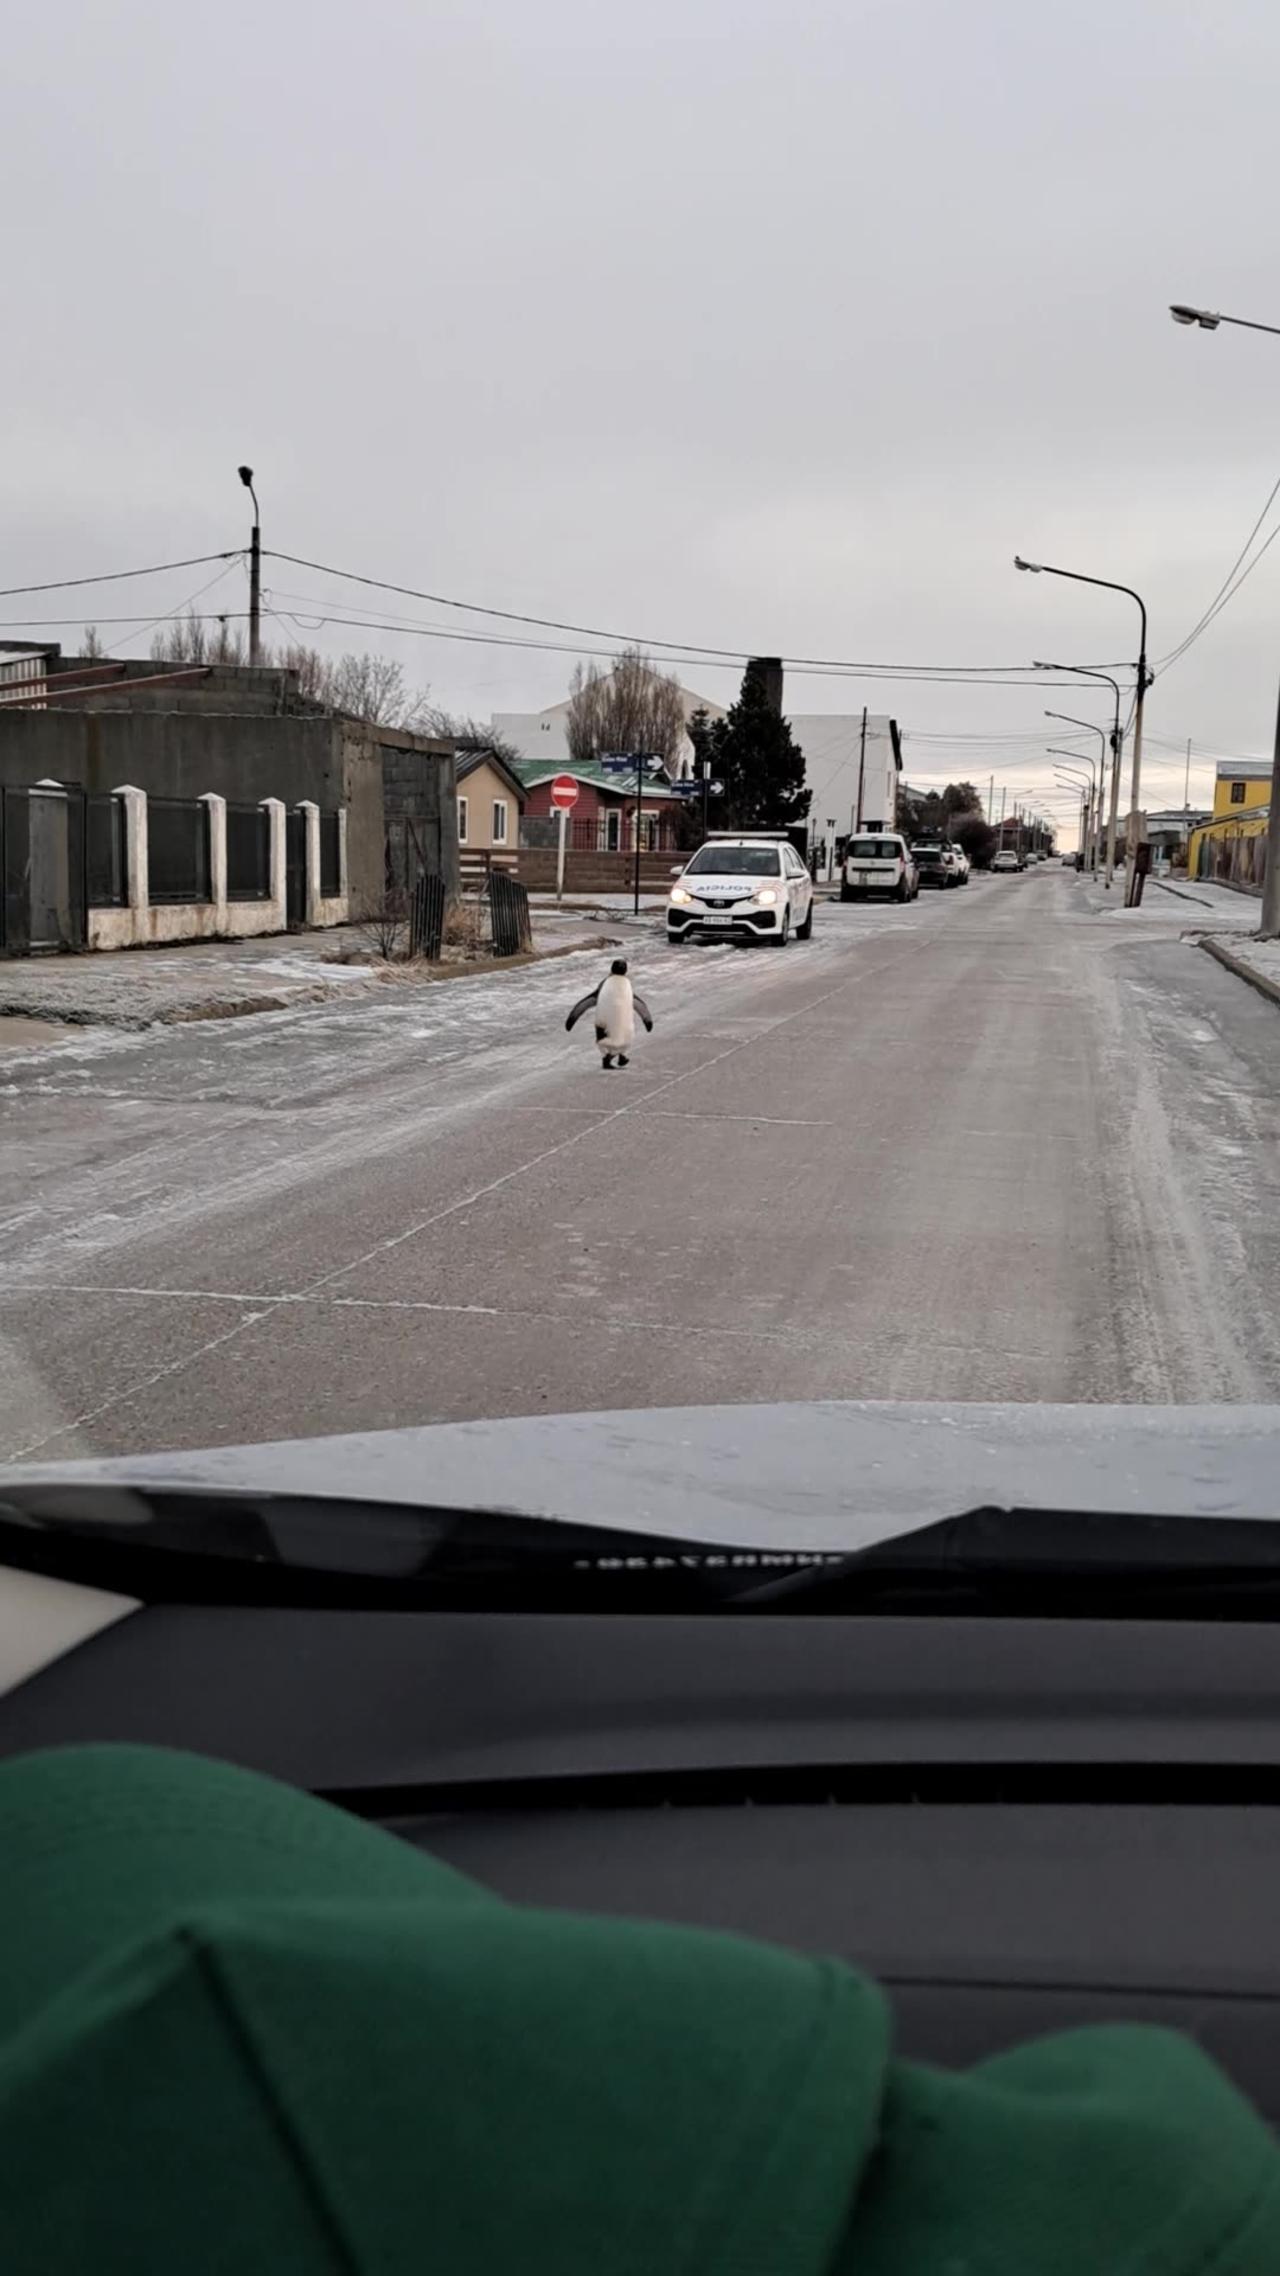 Penguin Approaches Vehicle